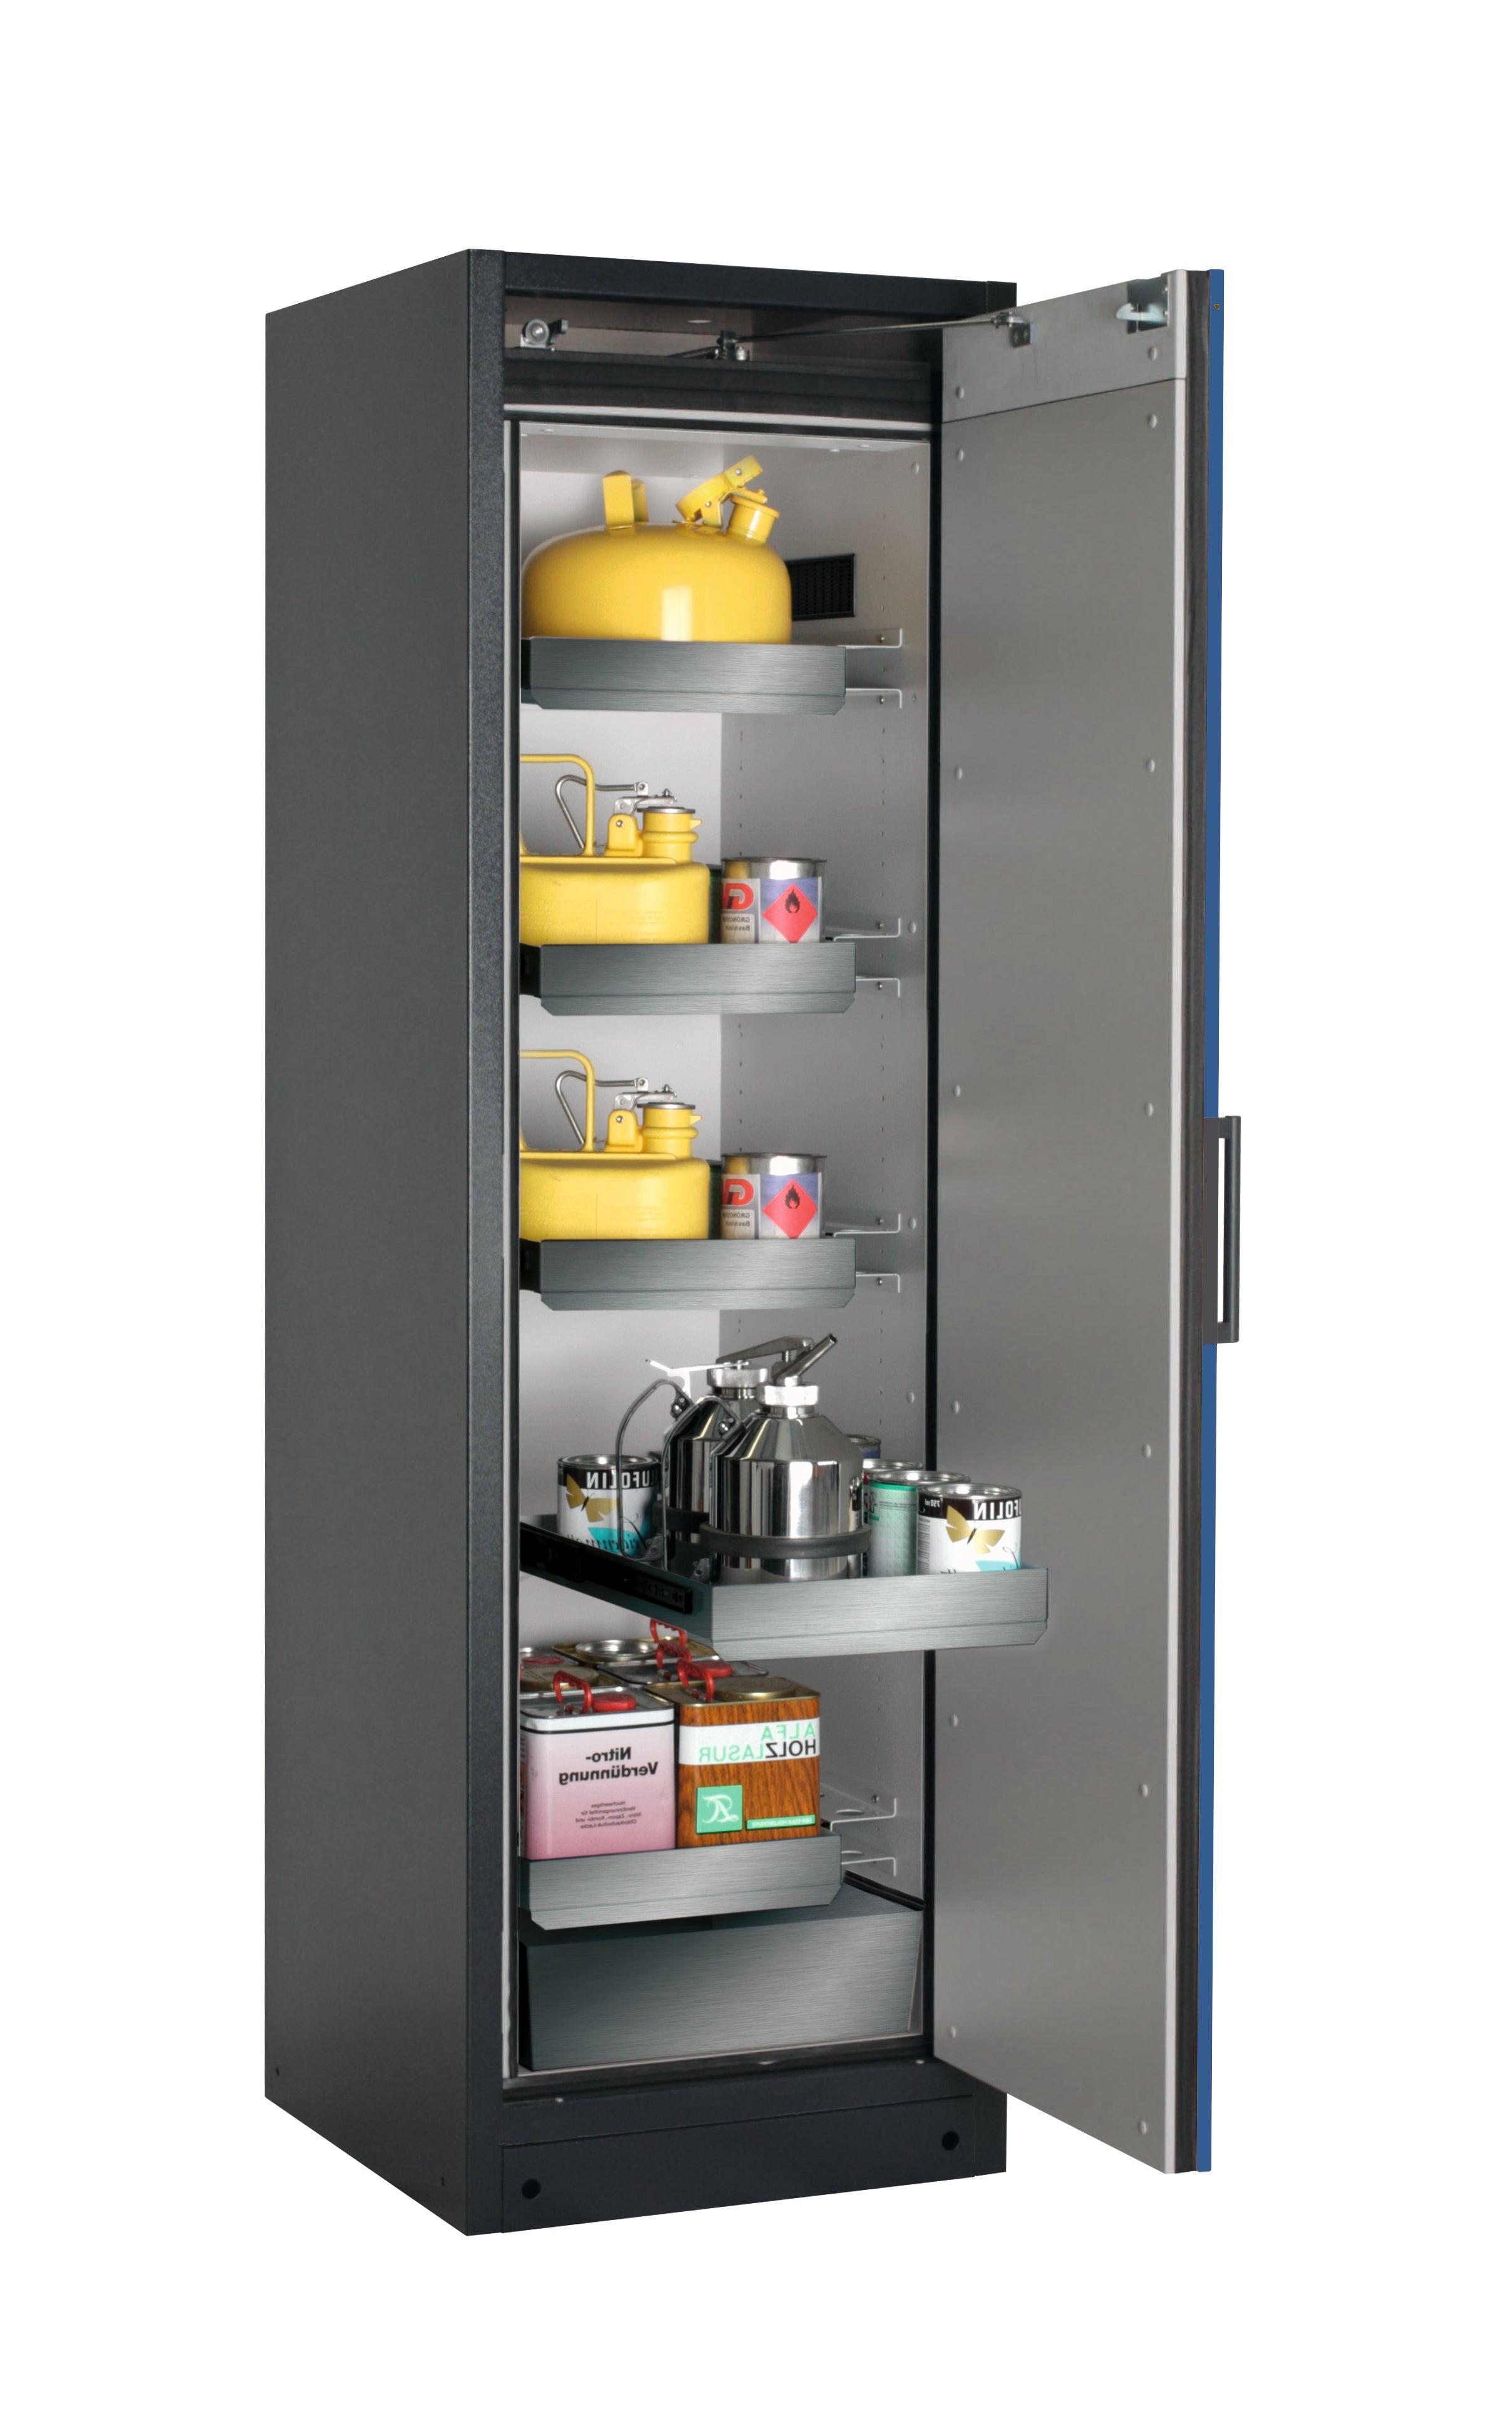 Type 90 safety storage cabinet Q-PEGASUS-90 model Q90.195.060.WDACR in gentian blue RAL 5010 with 4x drawer (standard) (stainless steel 1.4301),